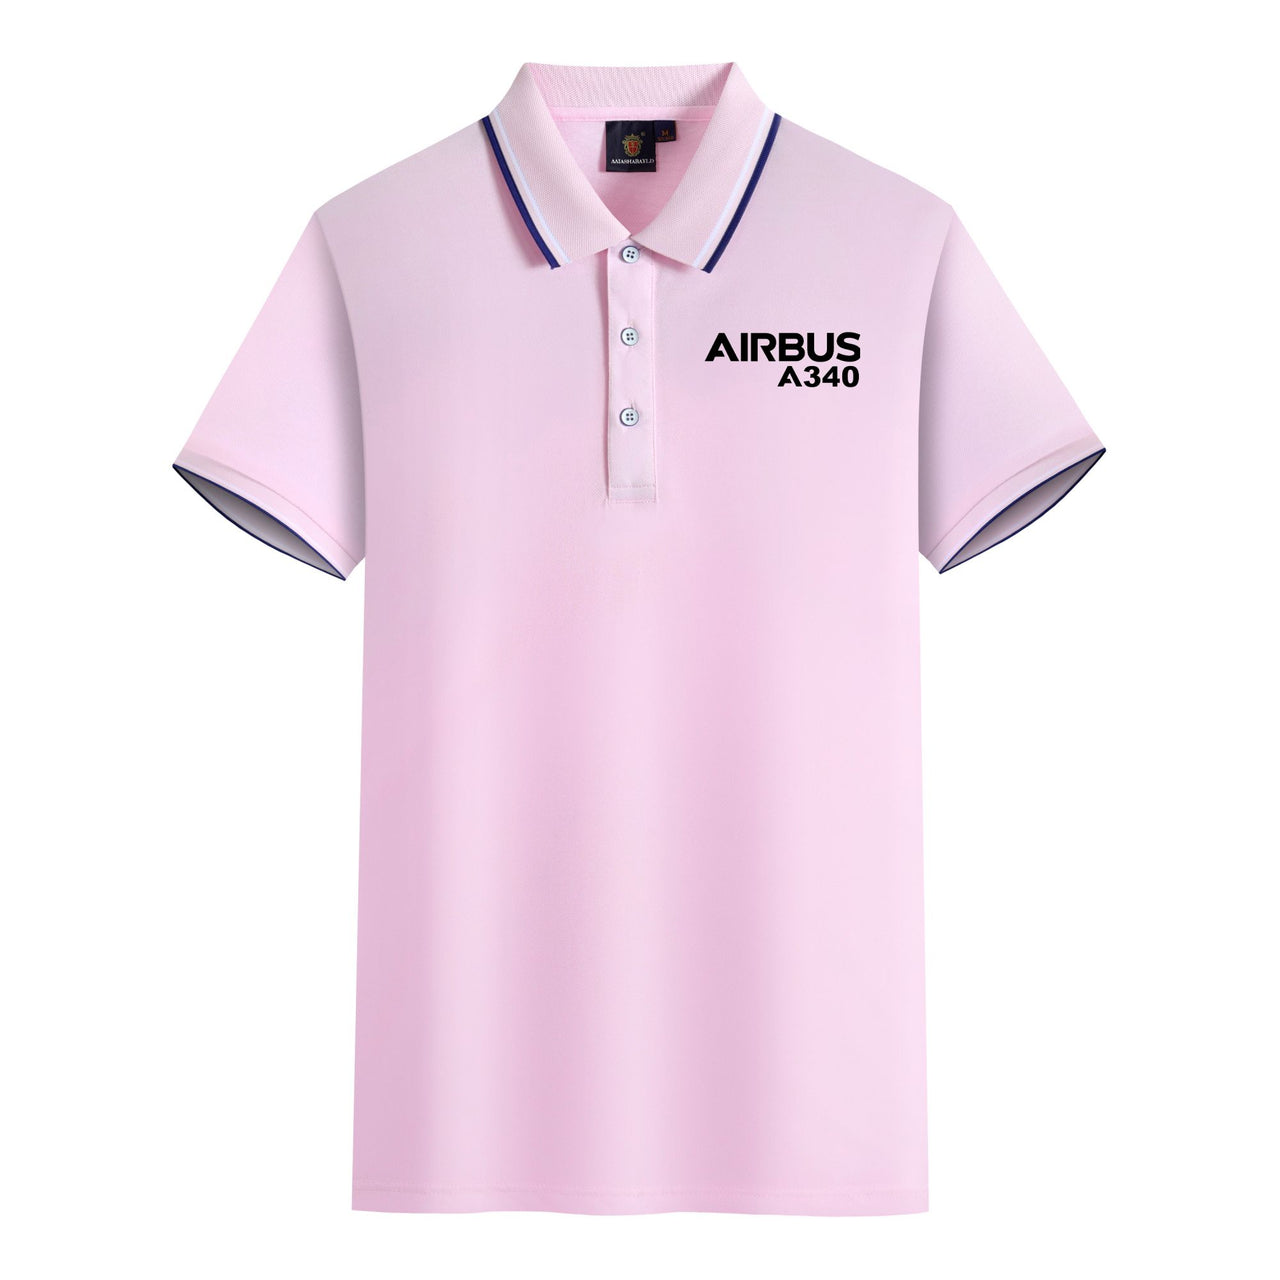 Airbus A340 & Text Designed Stylish Polo T-Shirts